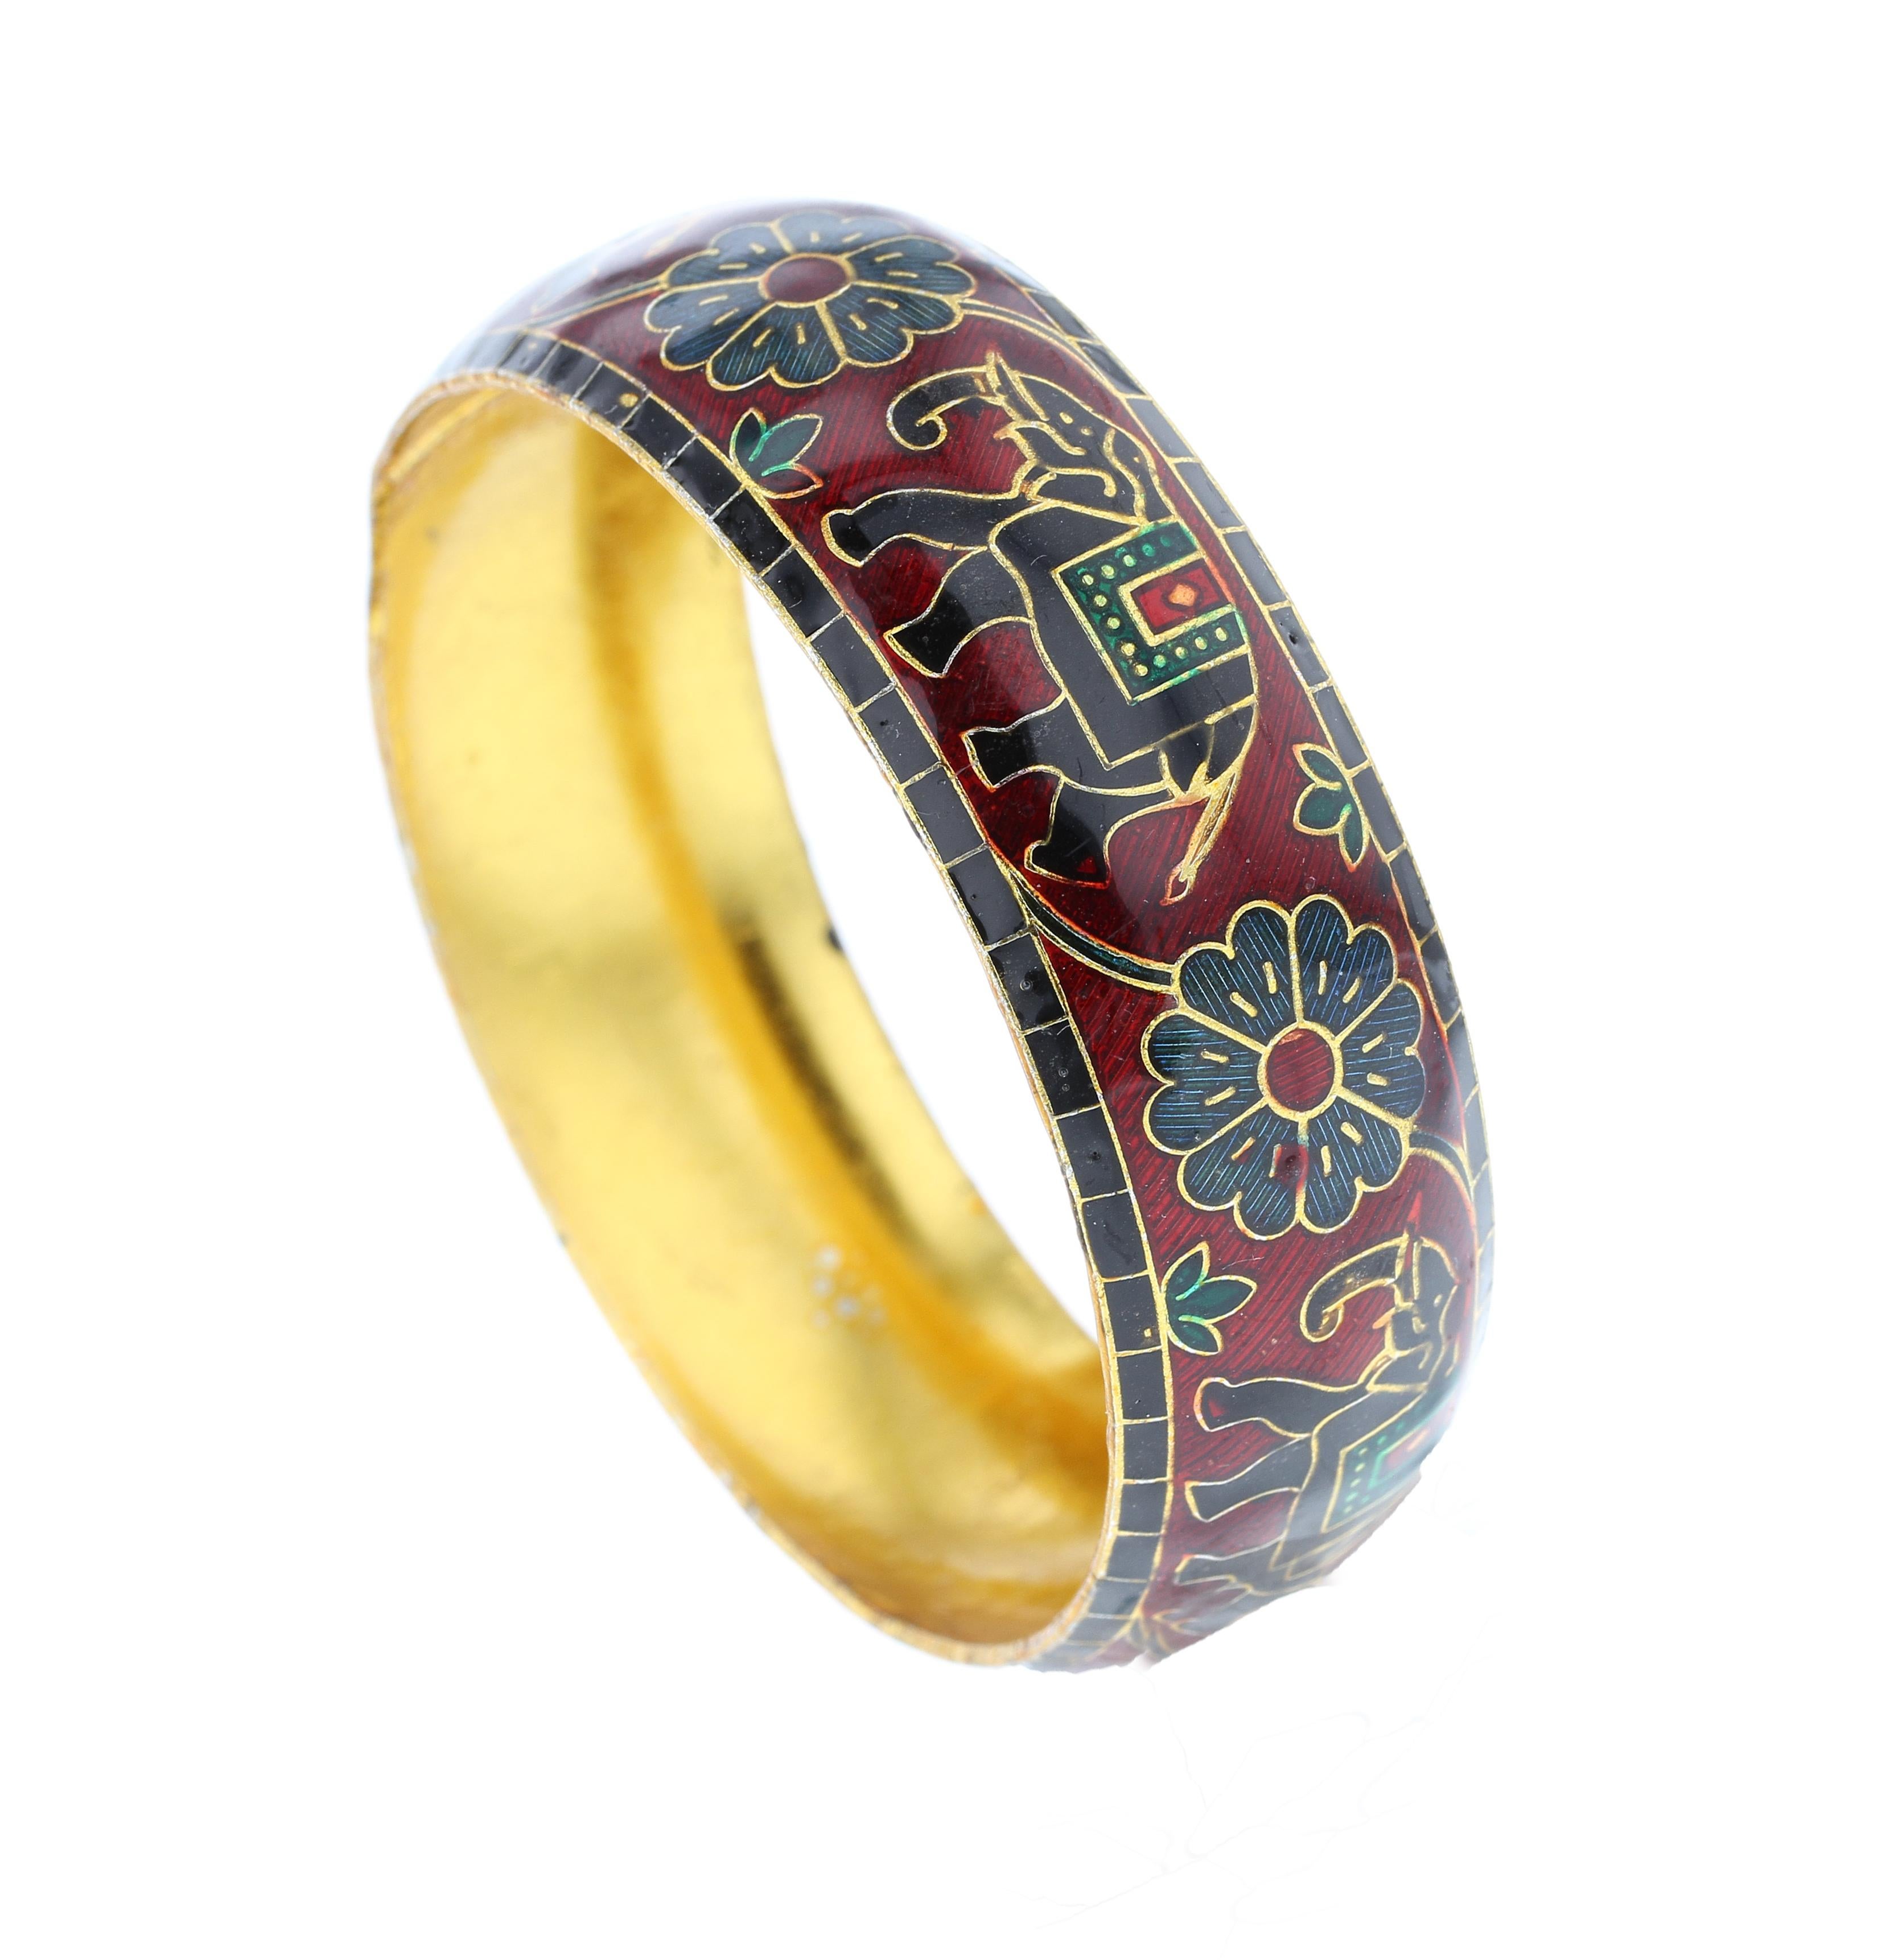 A trendy bangle/bracelet with an elephant and floral design in enamel. Inner Diameter: 2.50